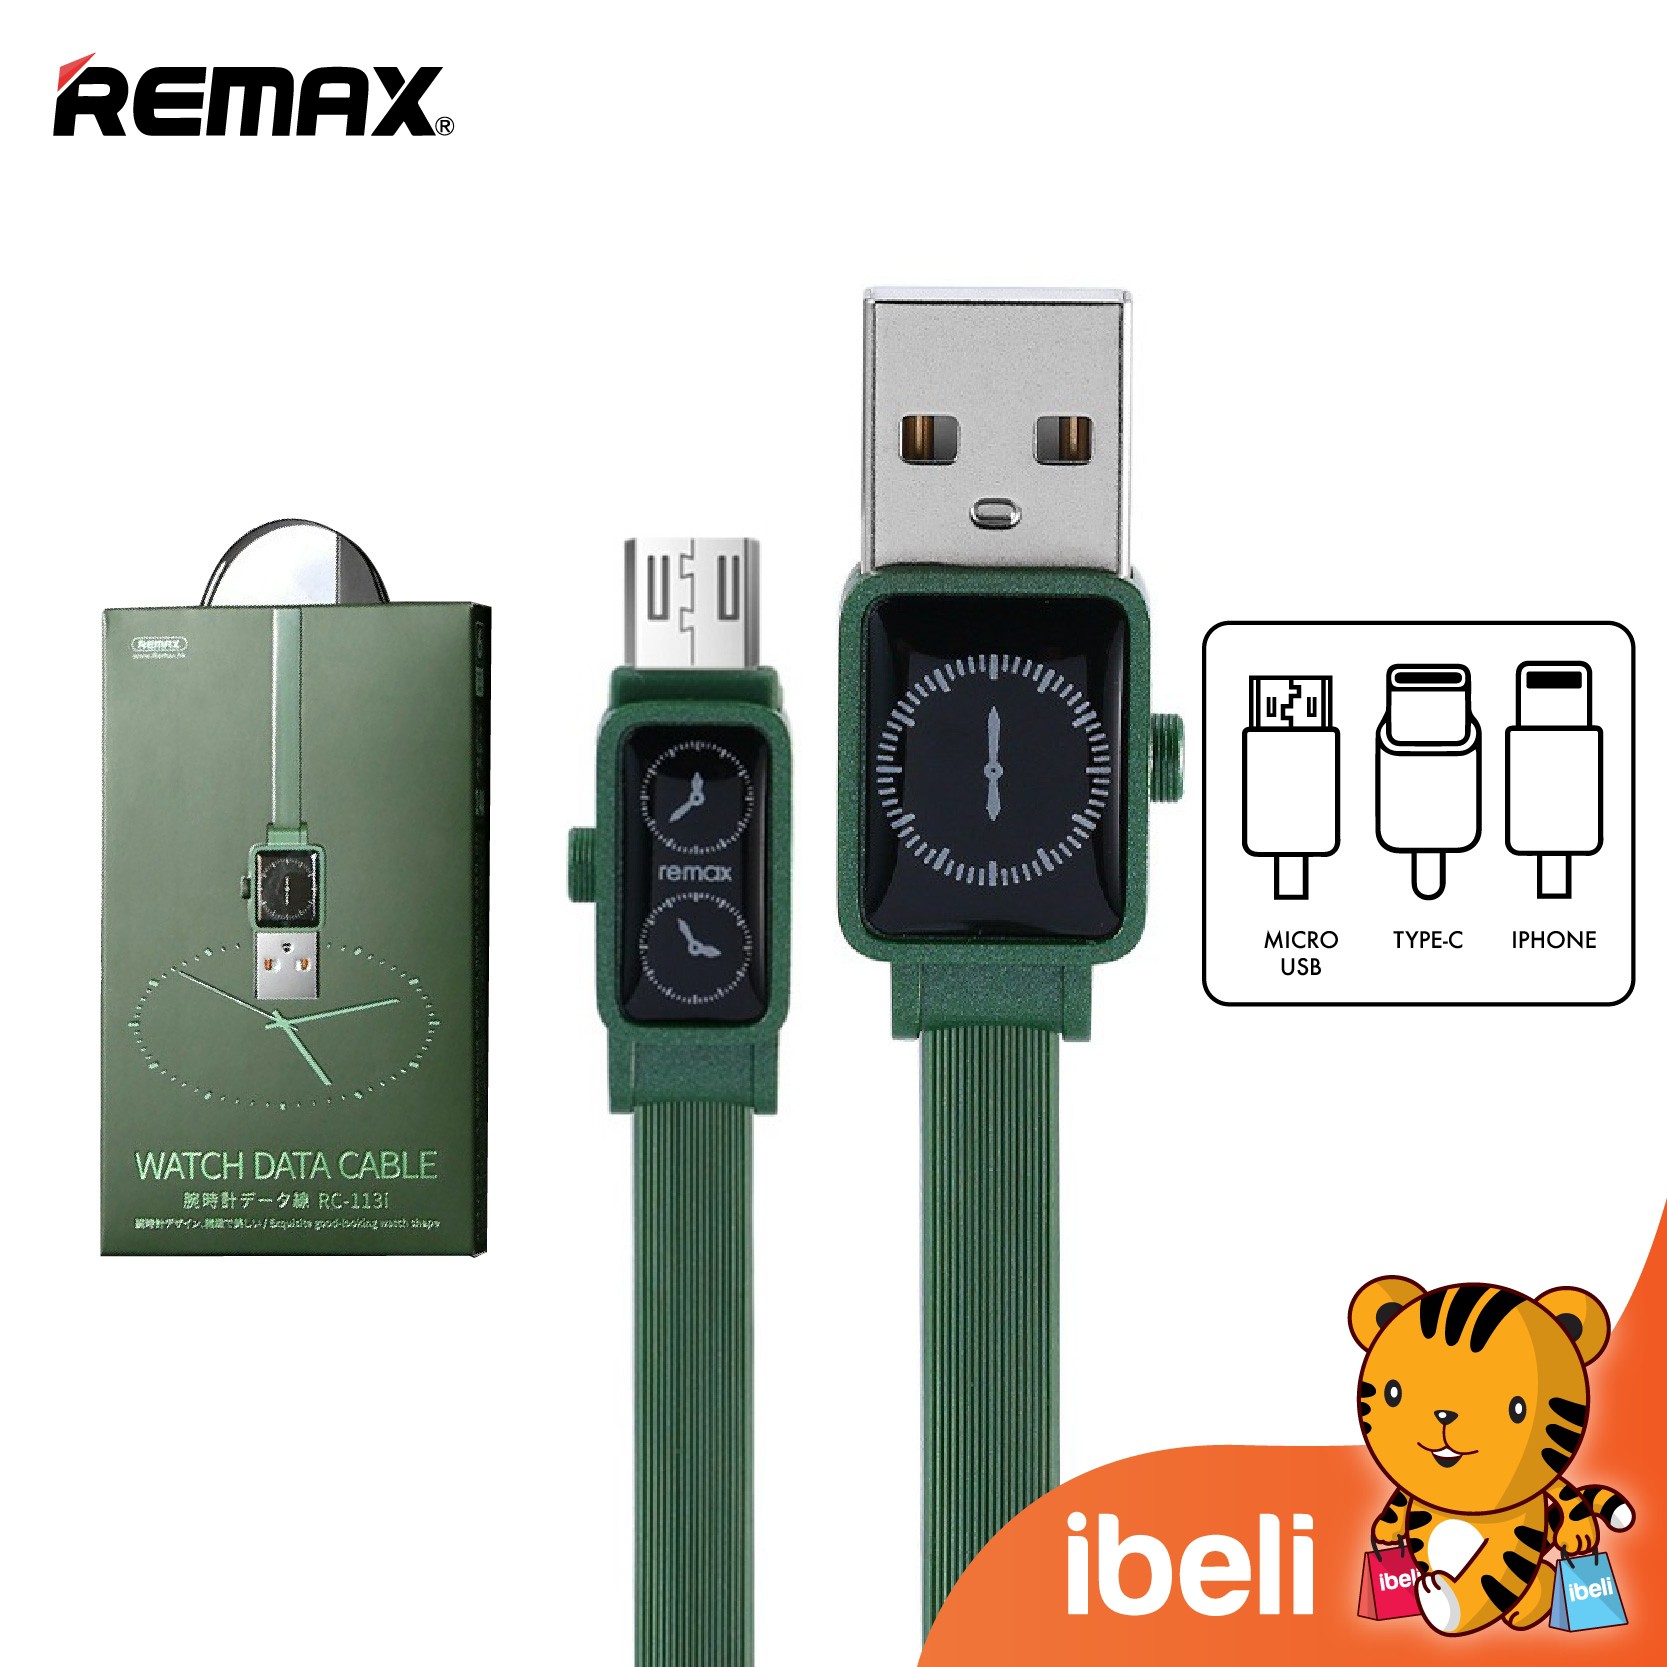 Remax Rc 113 Watch Design Data Transferring Cable Shopee Malaysia